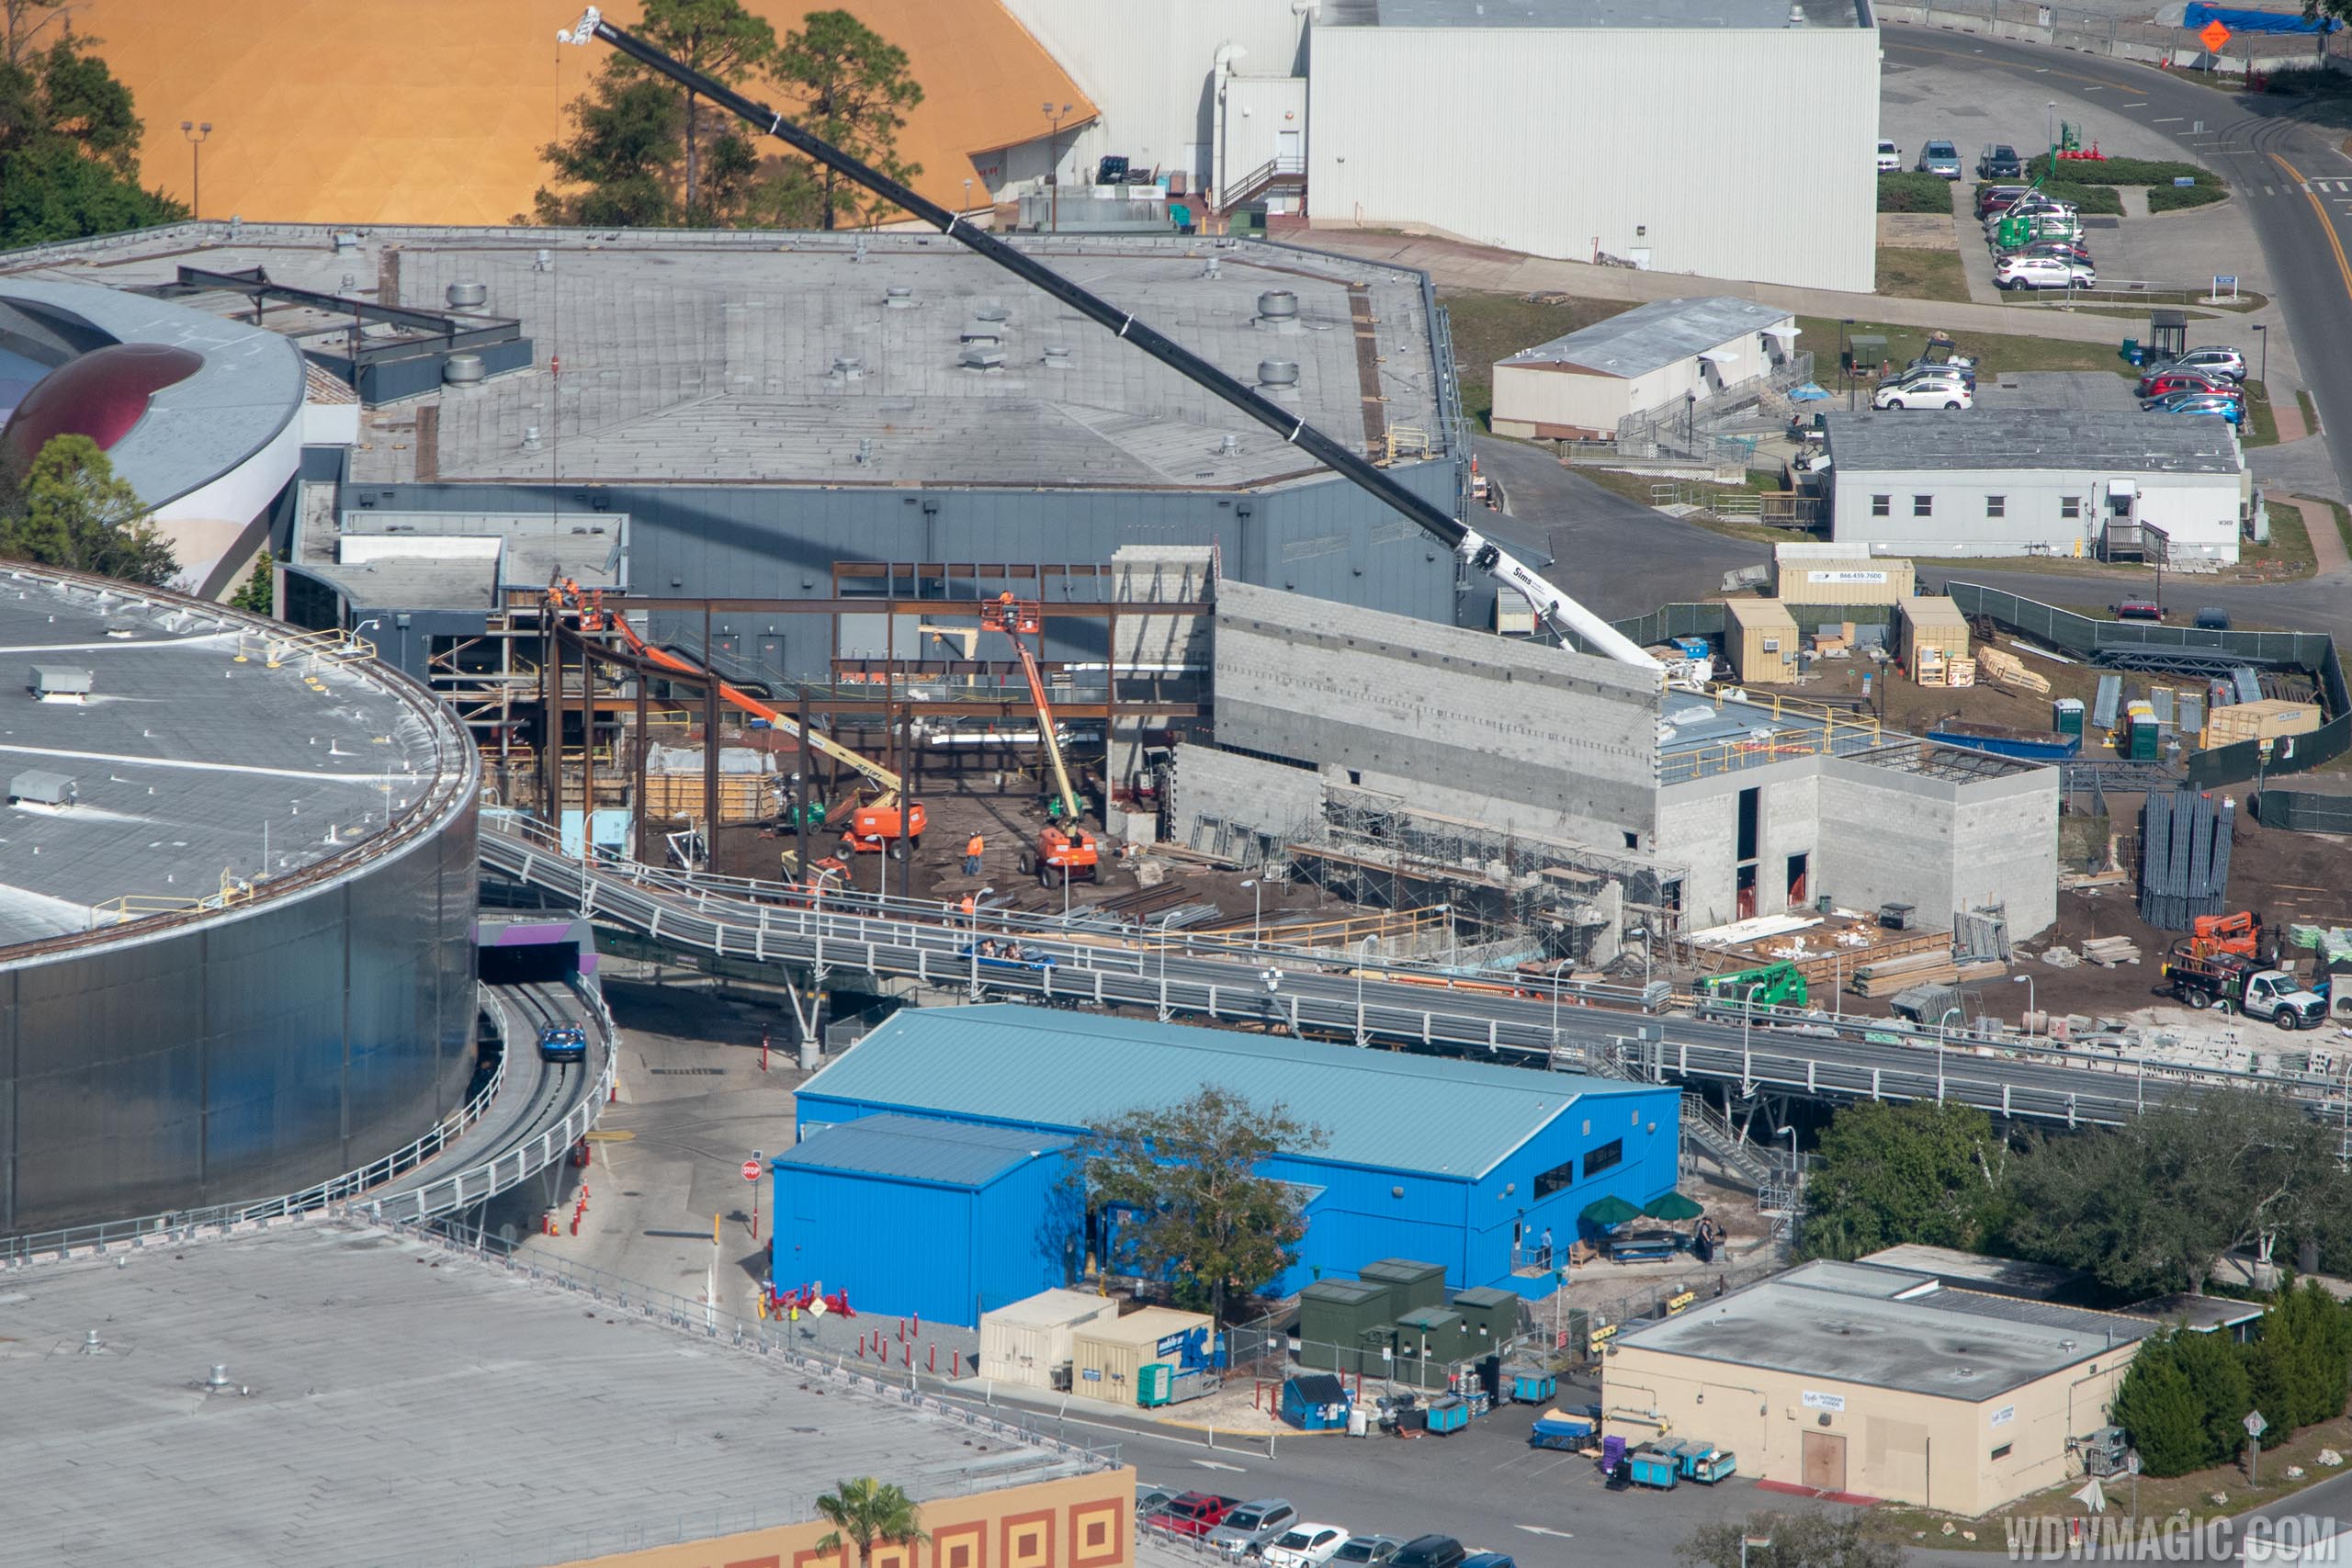 Epcot Space Restaurant construction - January 2019 - Photo 1 of 2